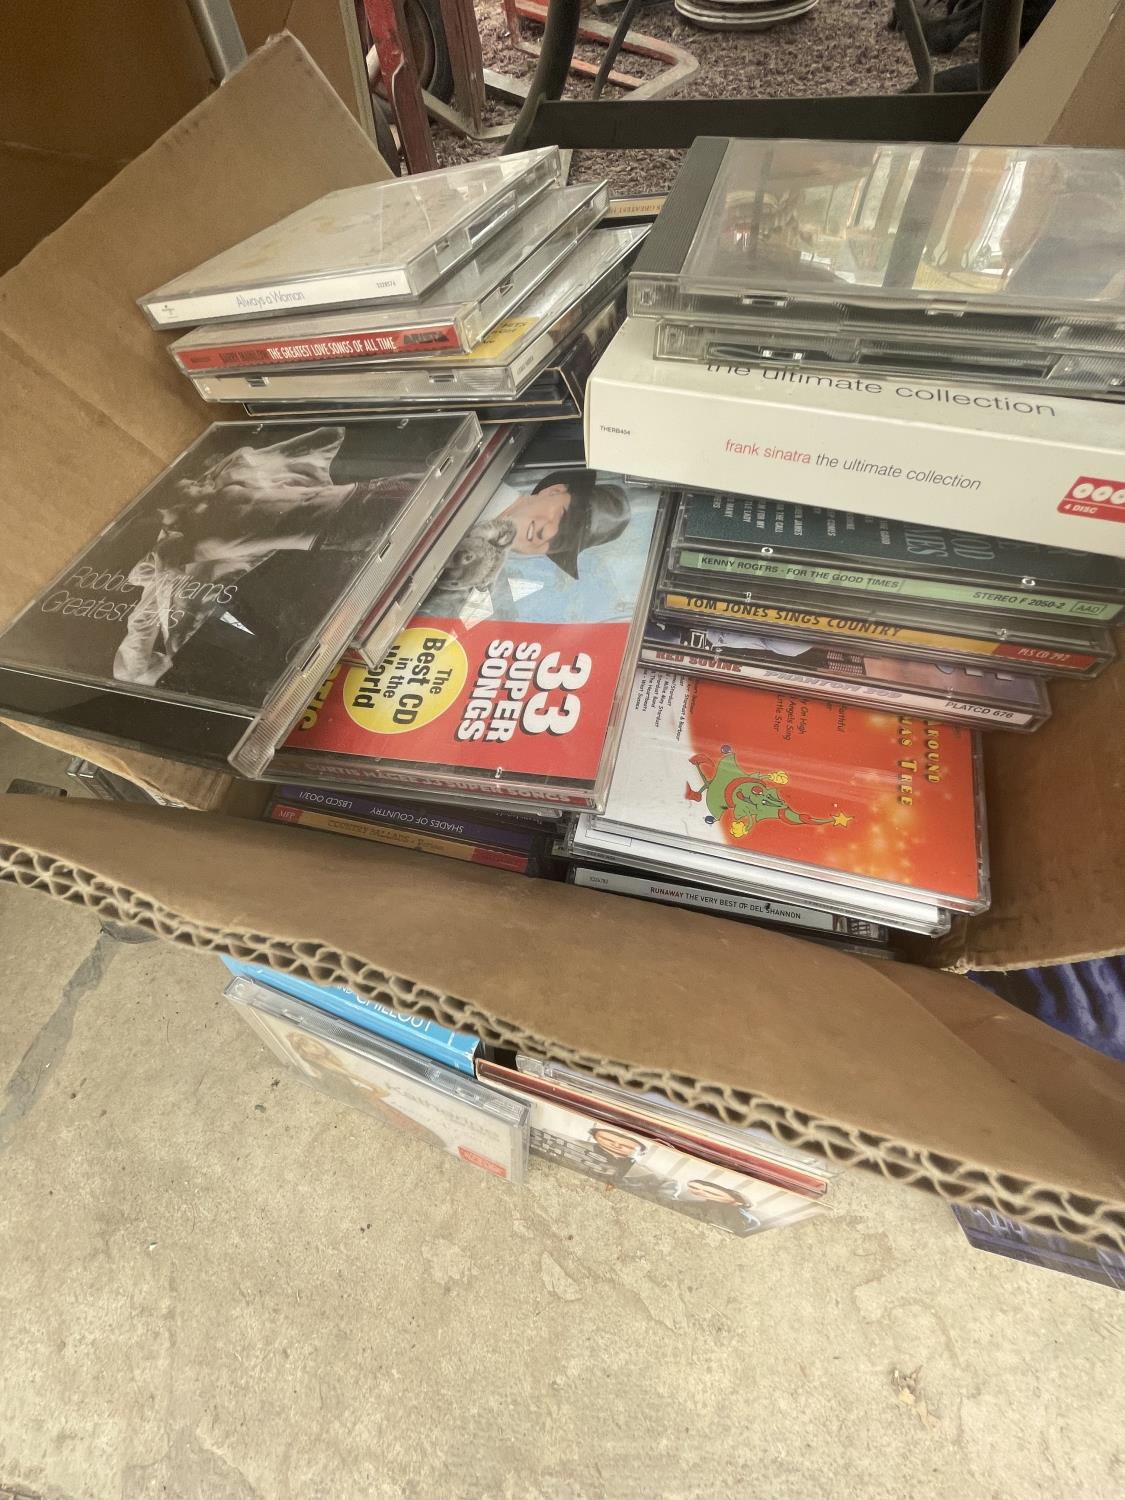 A LARGE QUANTITY OF RECORDS, CD'S ETC - Image 4 of 4